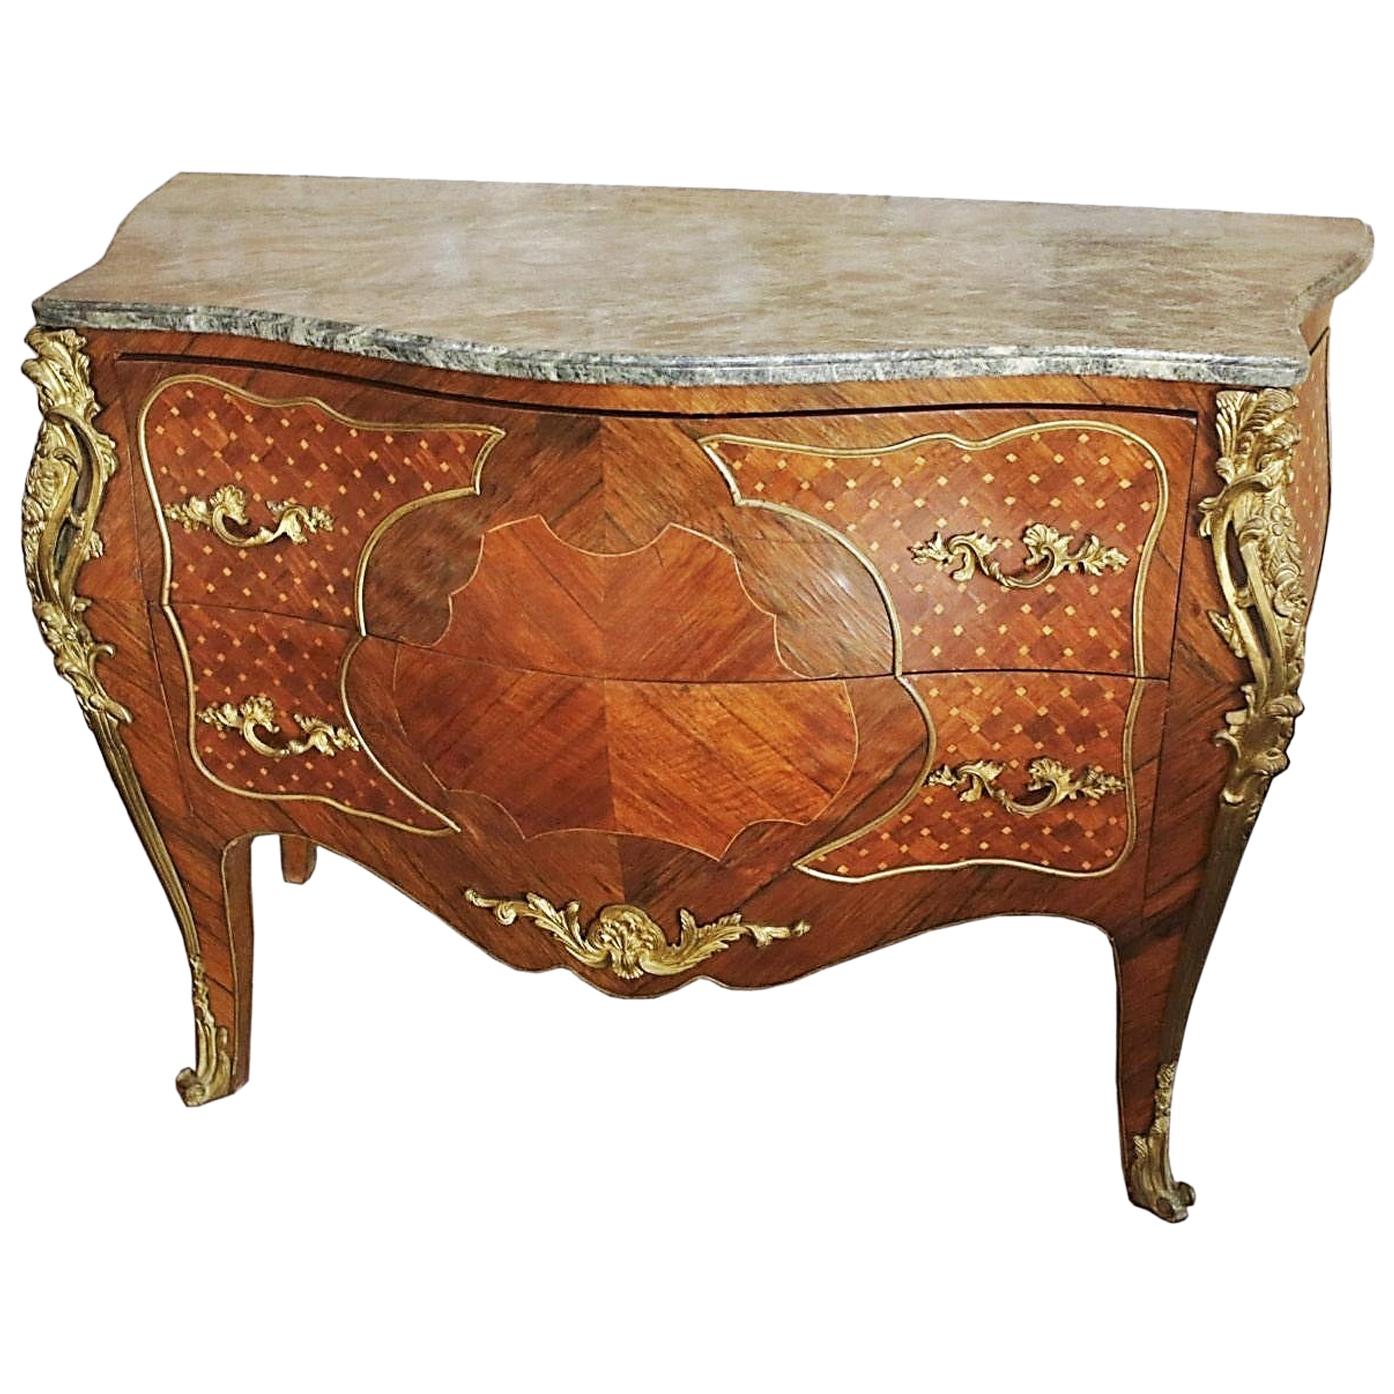 20th Century French Louis XV Inlaid Marble and Ormolu Bombe Commode